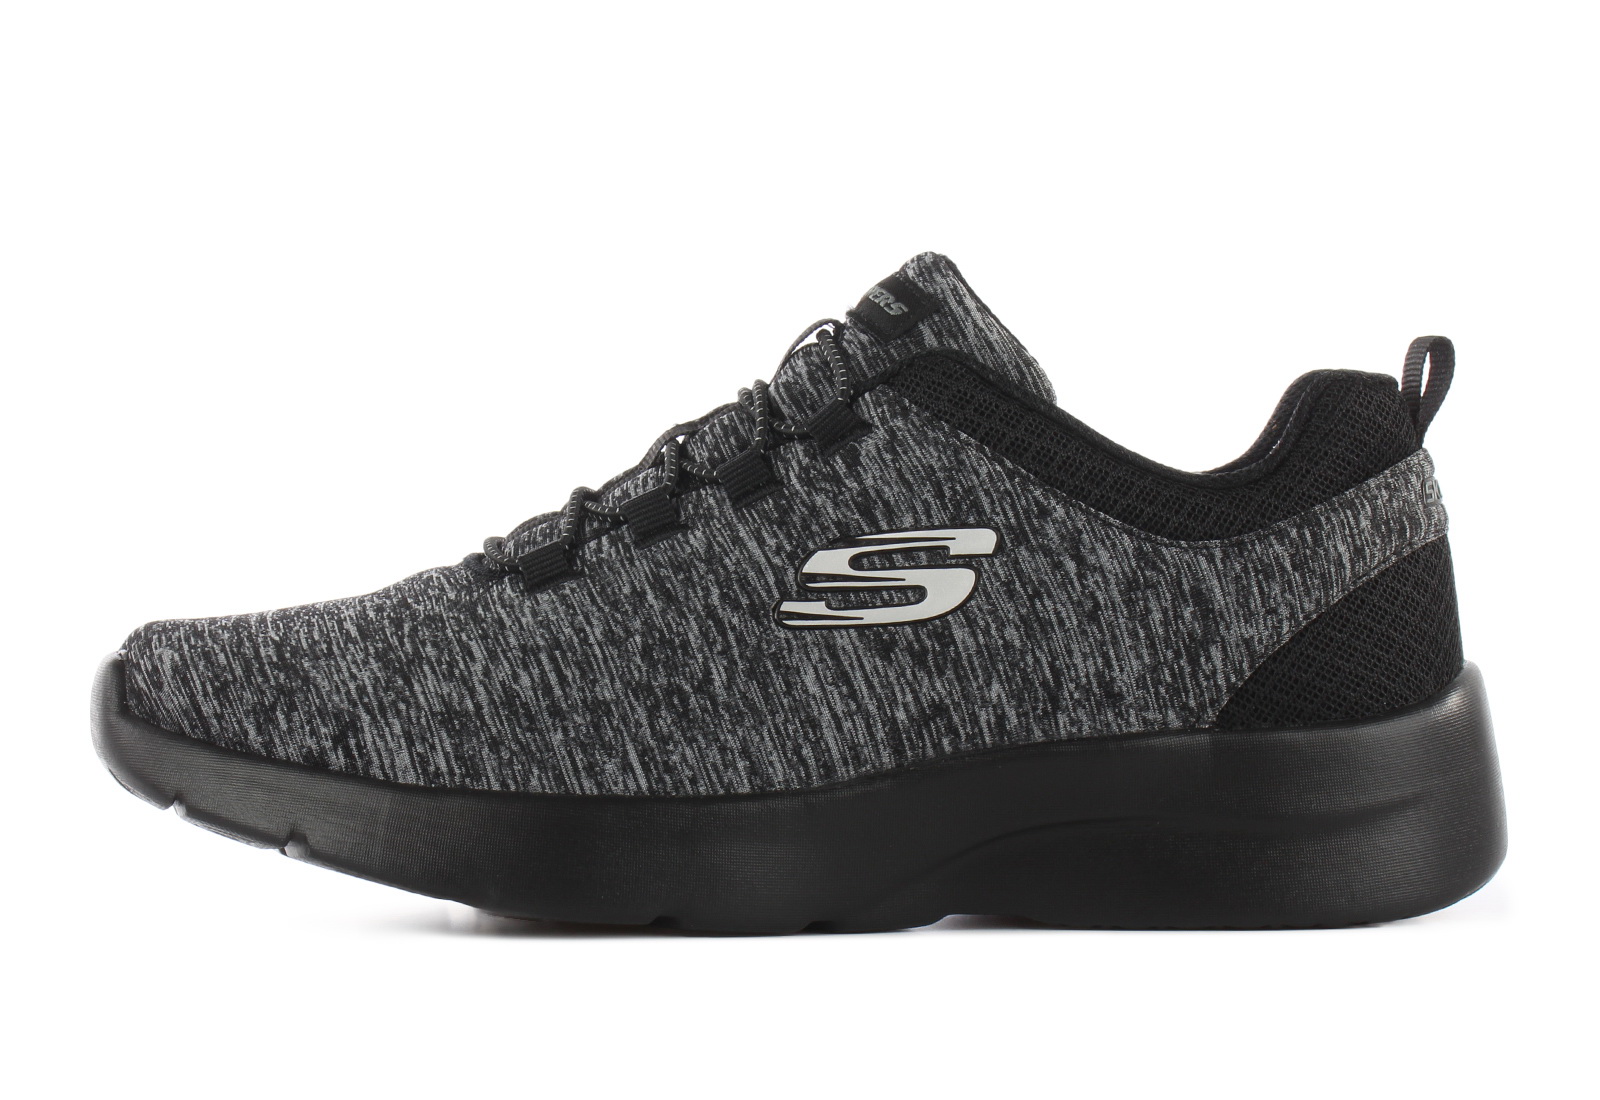 Skechers Sneakers - Dynamight 2.0 - In A Flash - 12965-BKCC - Online shop for sneakers, shoes and